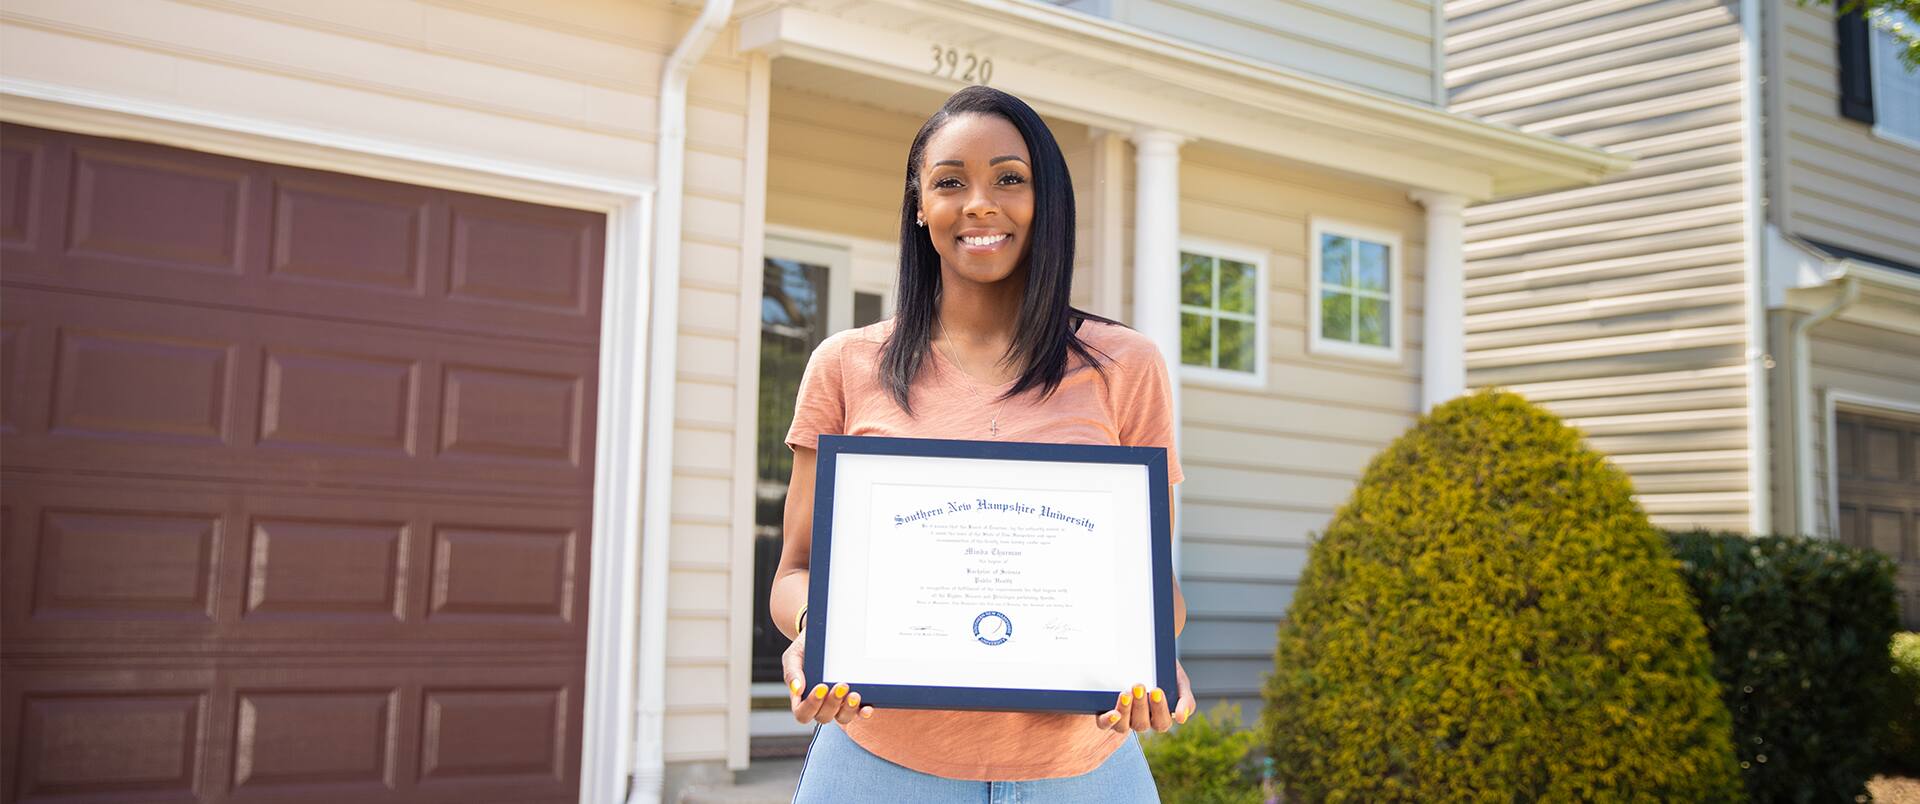 Minda Thurman, who earned her degree from SNHU, standing in front of her home holding her framed.